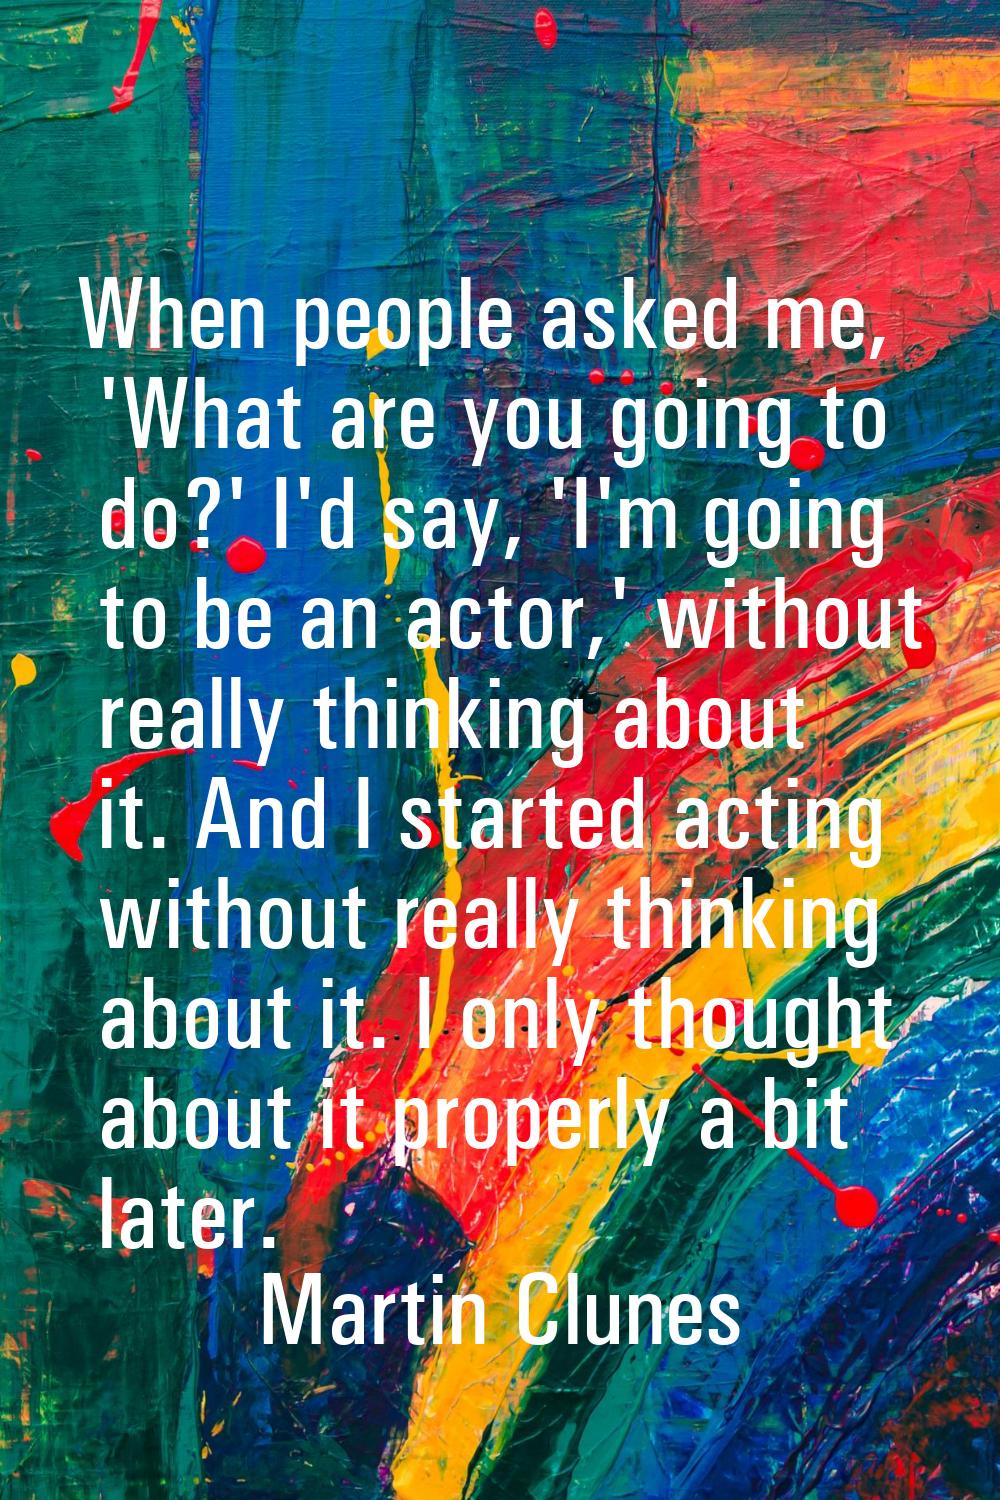 When people asked me, 'What are you going to do?' I'd say, 'I'm going to be an actor,' without real